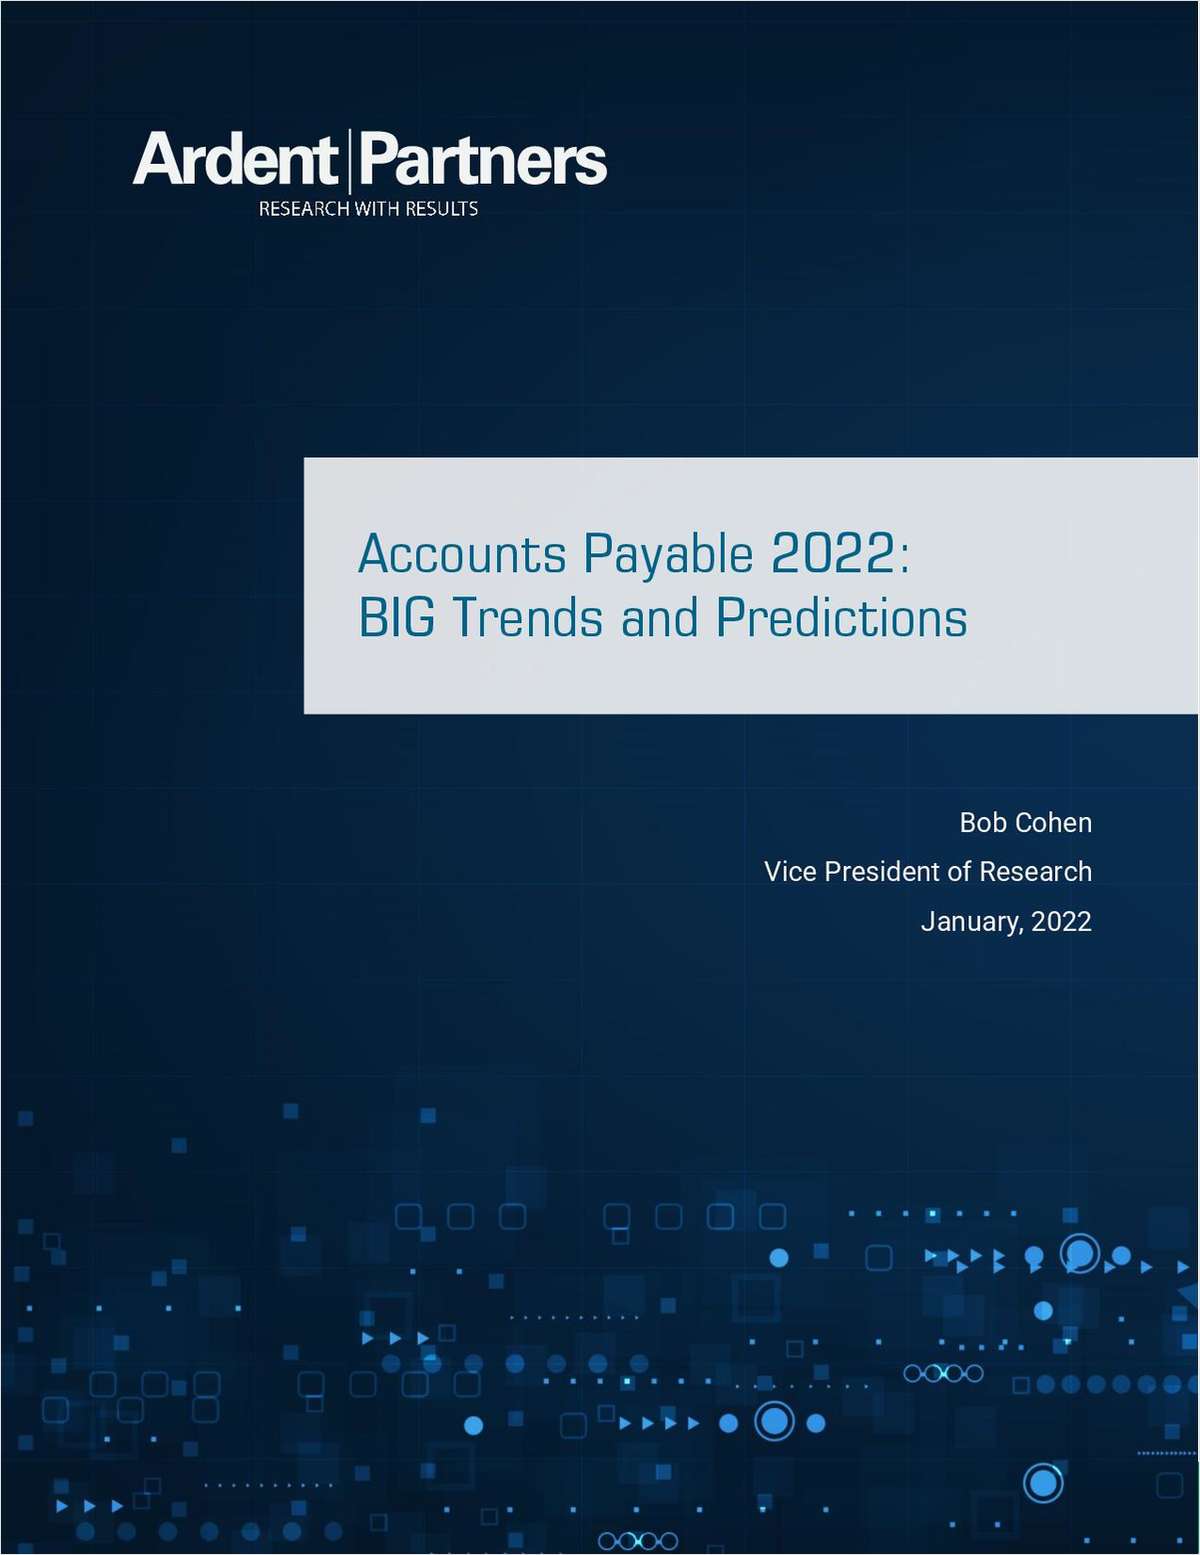 Accounts Payable 2022: BIG Trends and Predictions